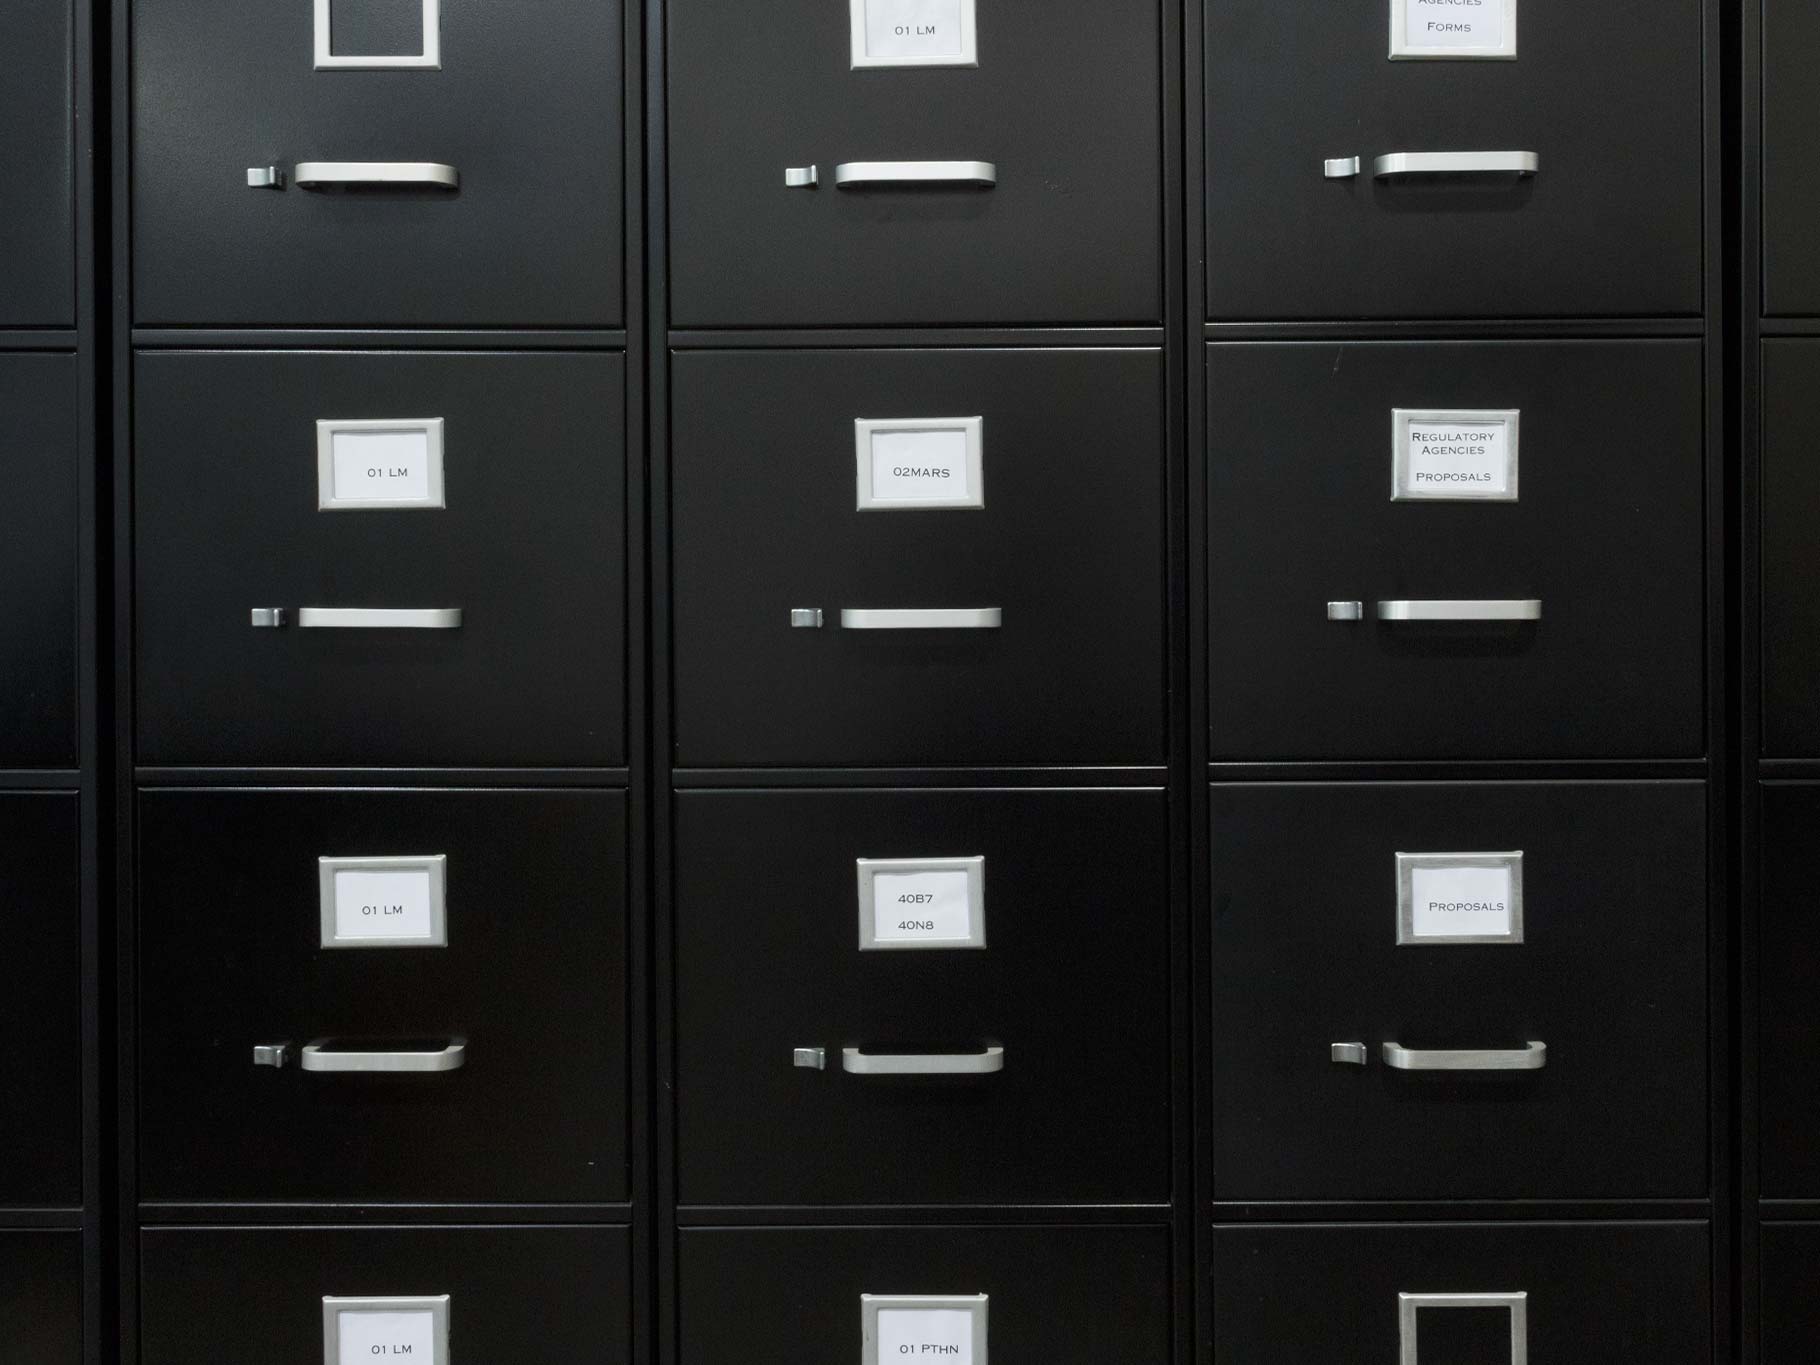 File Cabinets Full of Projects